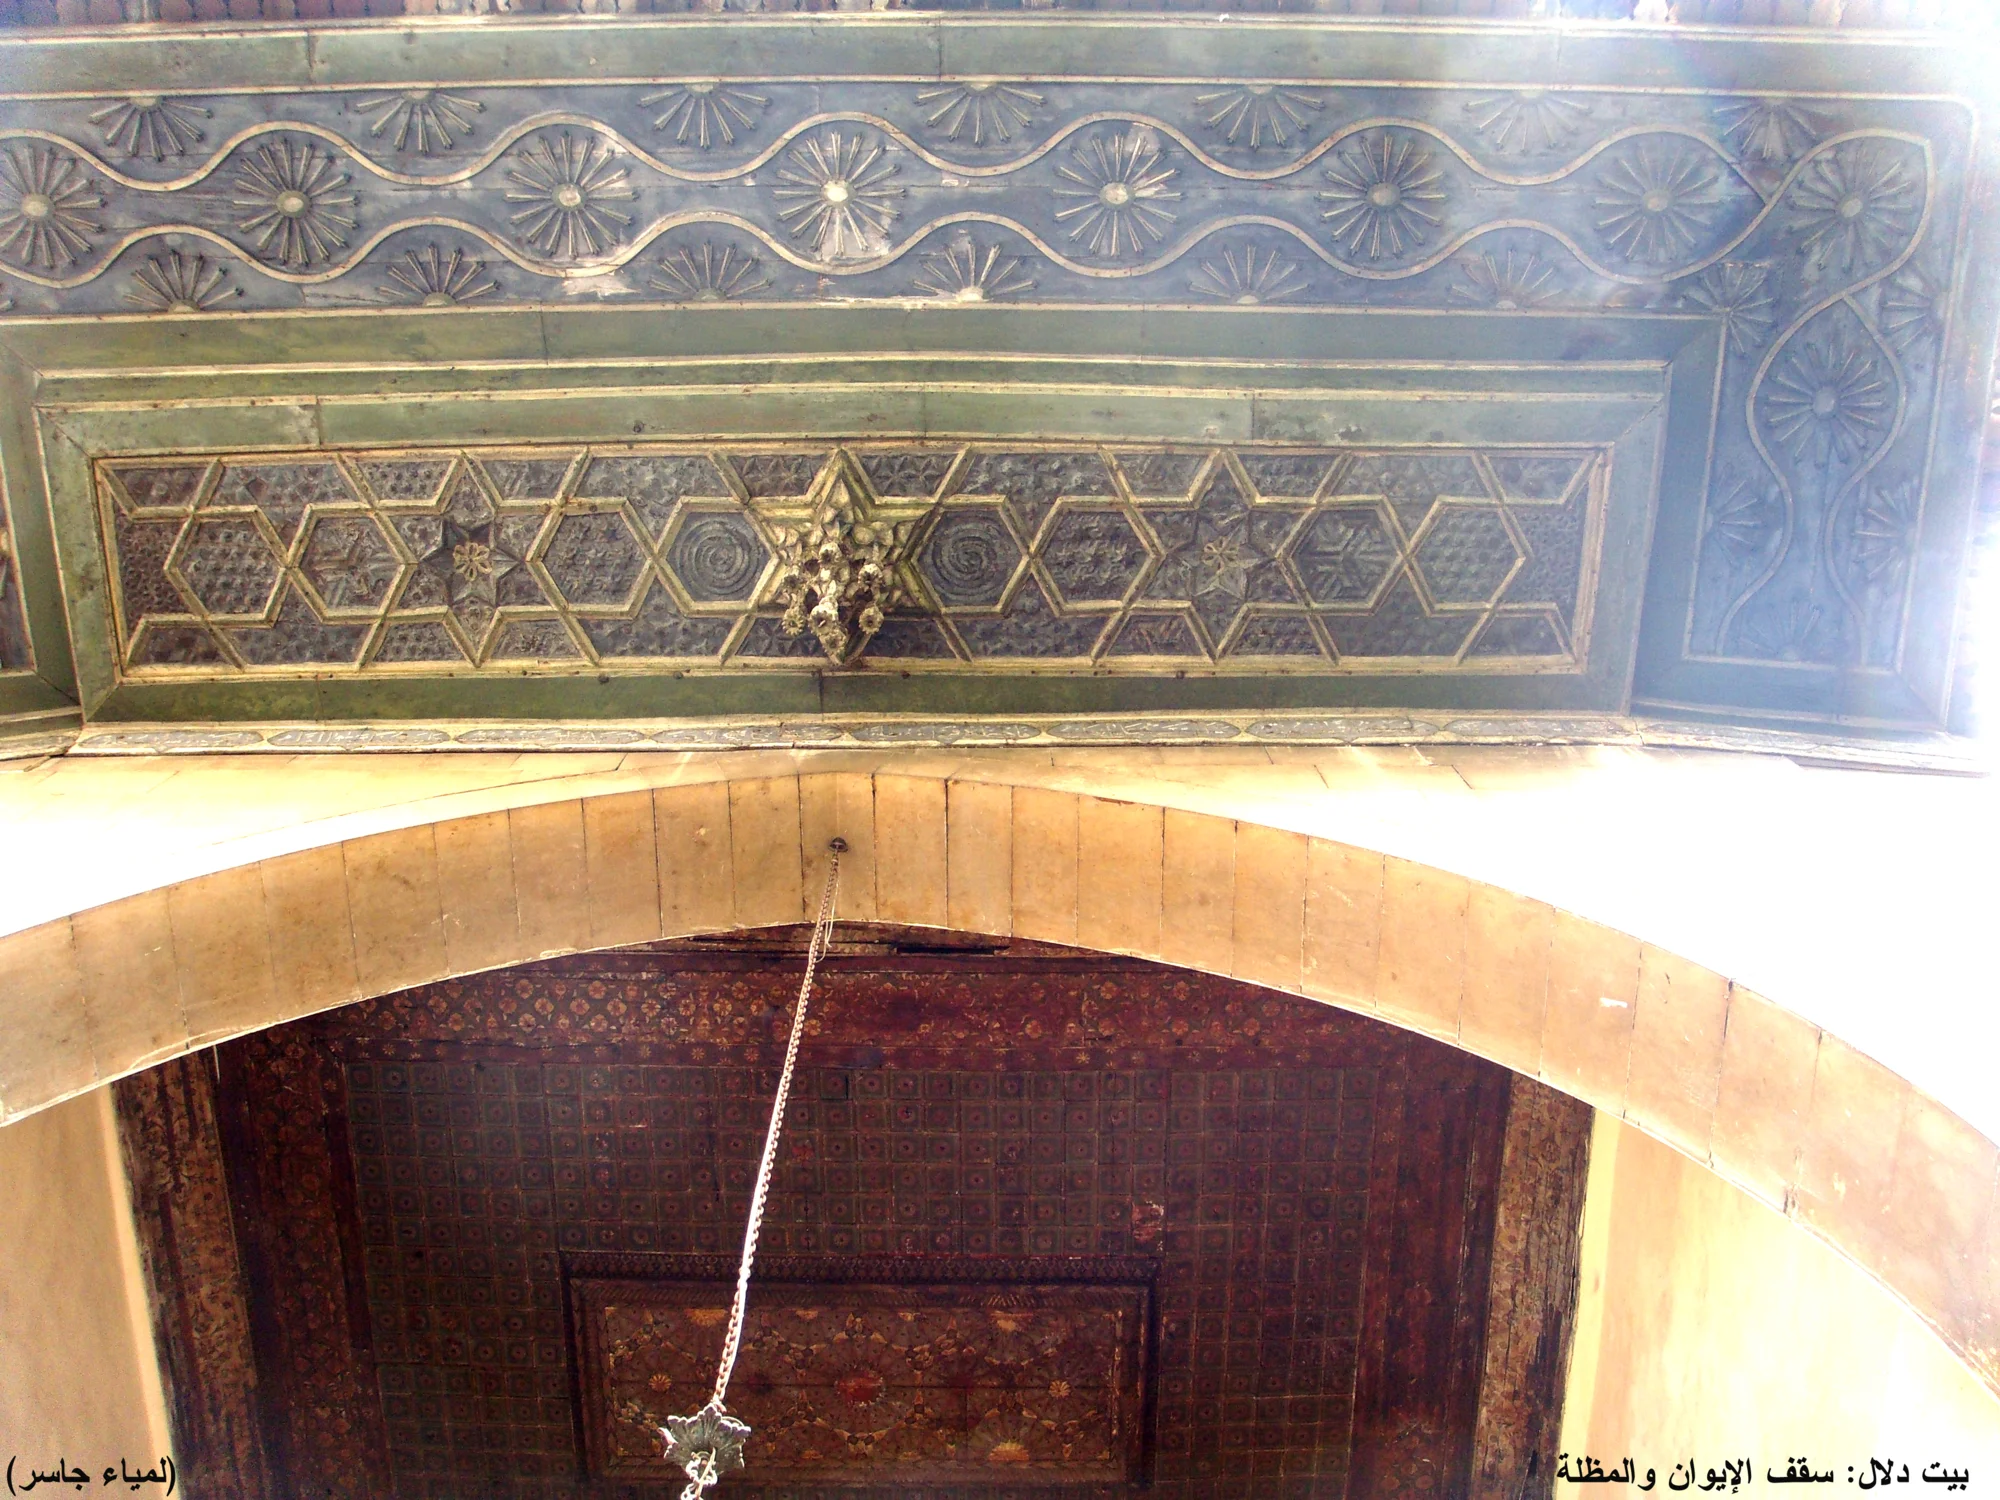 Bayt Dallal, iwan ceiling and canopy